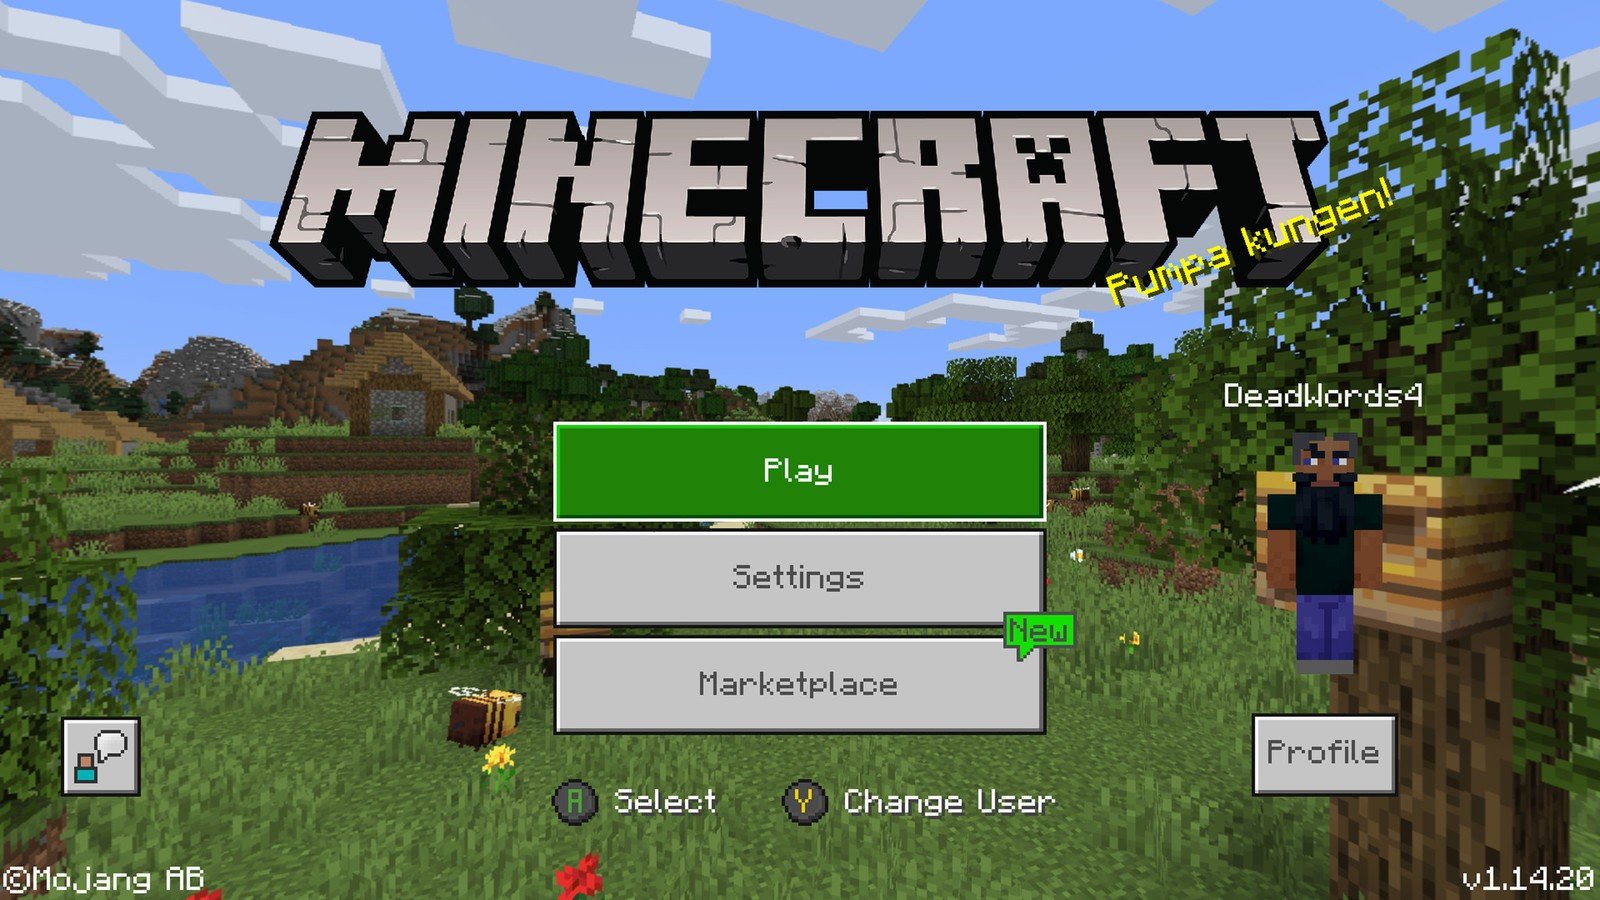 How To Join Someones World In Minecraft Pc 2020